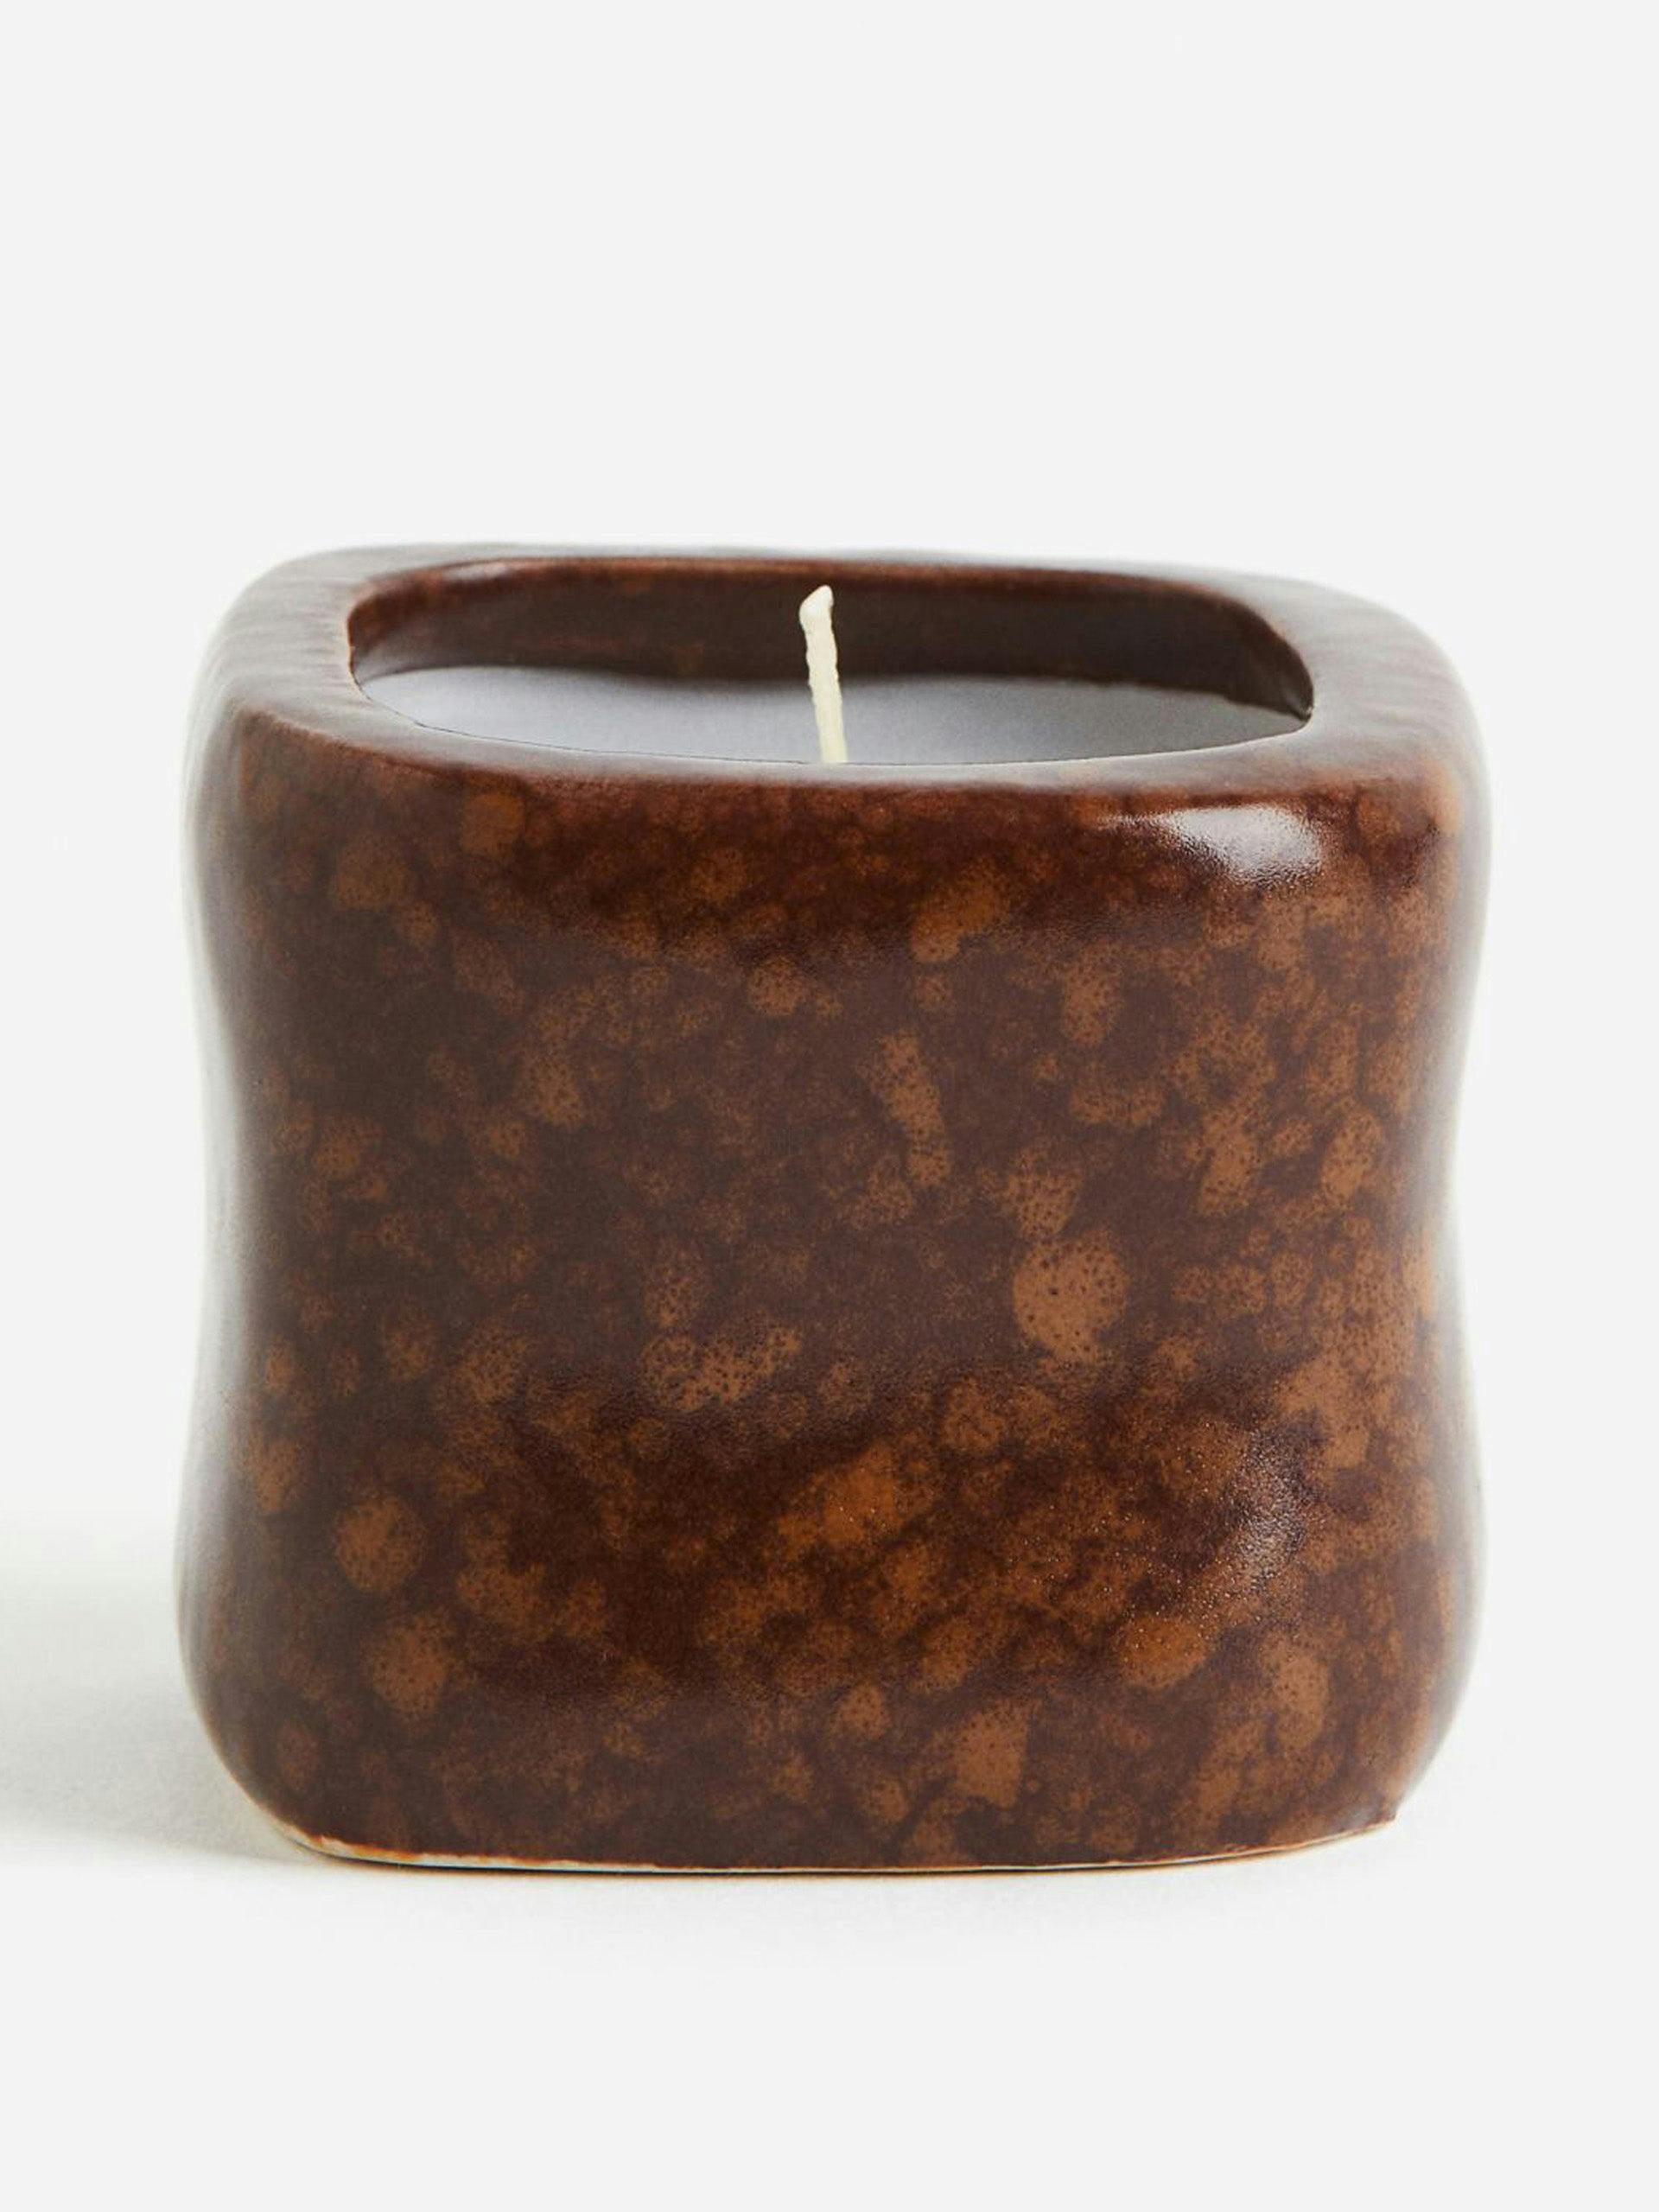 Scented candle in a ceramic holder